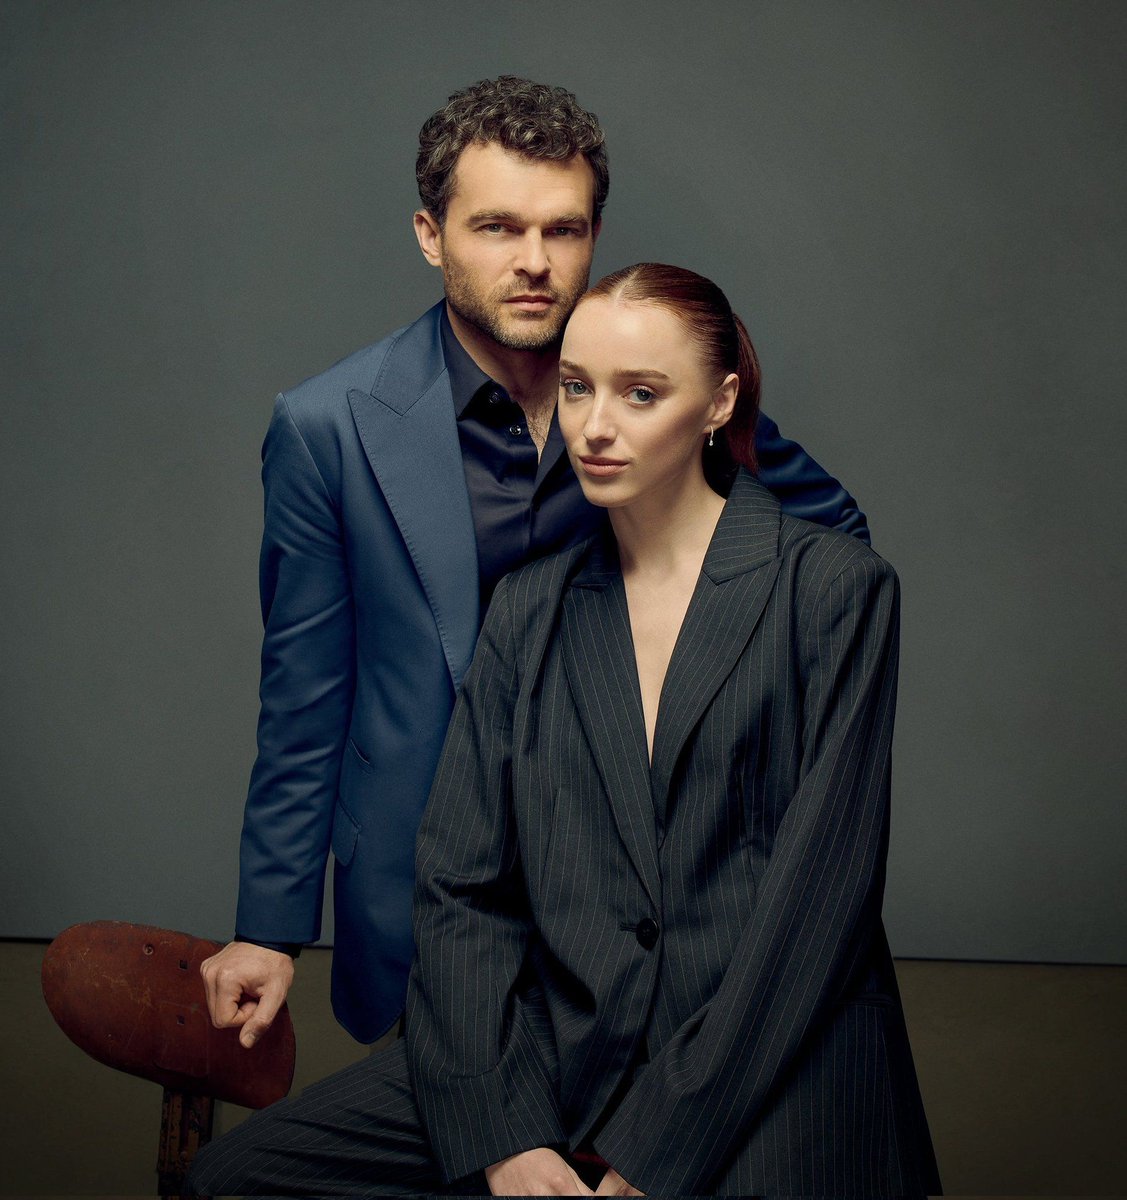 Alden Ehrenreich and Phoebe Dynevor in a photo shoot for Fair play. Photography by Sheryl Nields for Nextlix Queue. 😍📸 Adoring Alden Ehrenreich - An Alden Ehrenreich Fansite >>> tumblr.com/babyjujubee